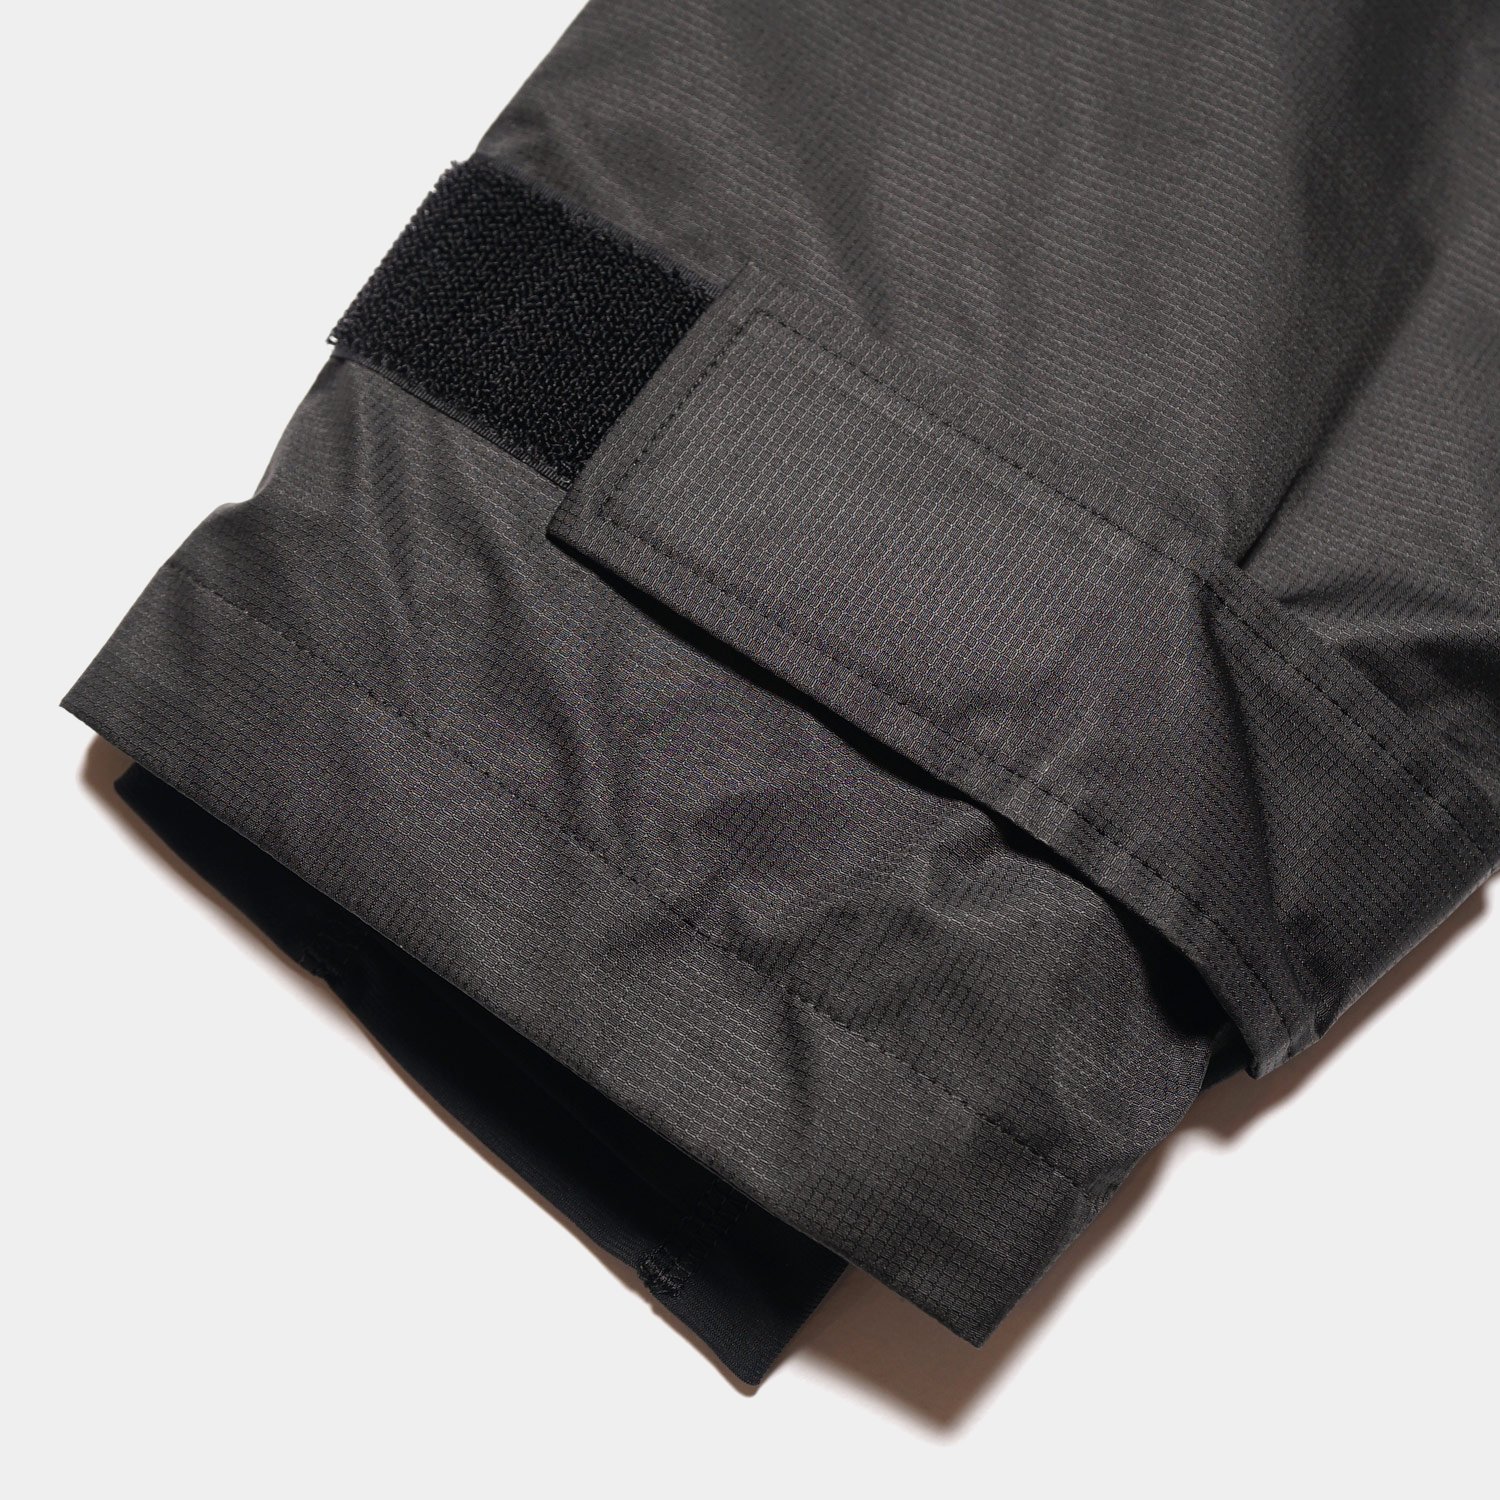 Water Proof Dry Arm Cover / Off Black